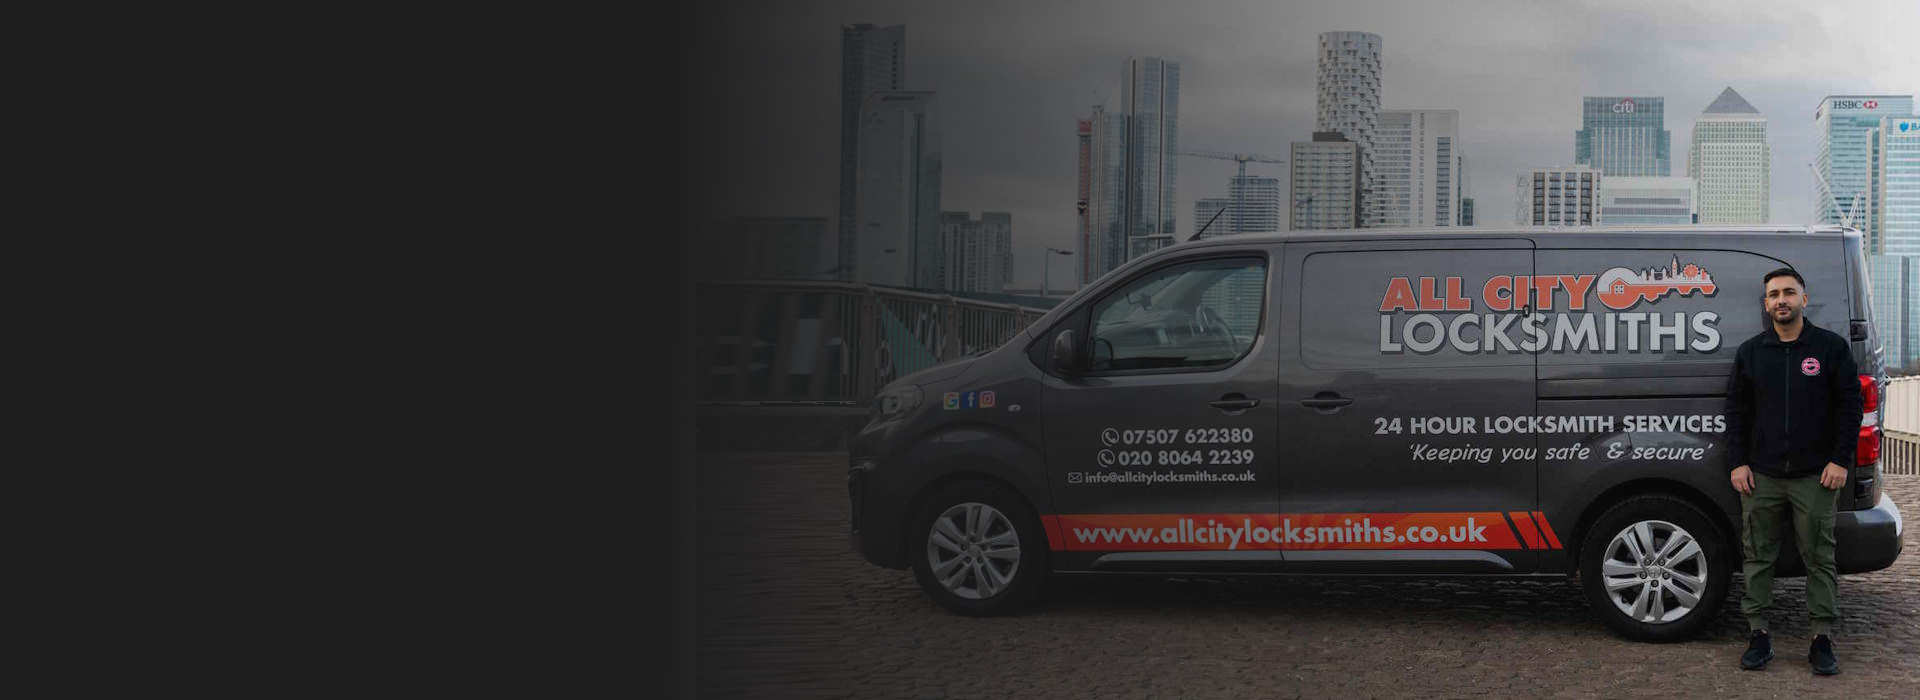 Stelios - Locksmith in Sidcup by his van with London cityscape